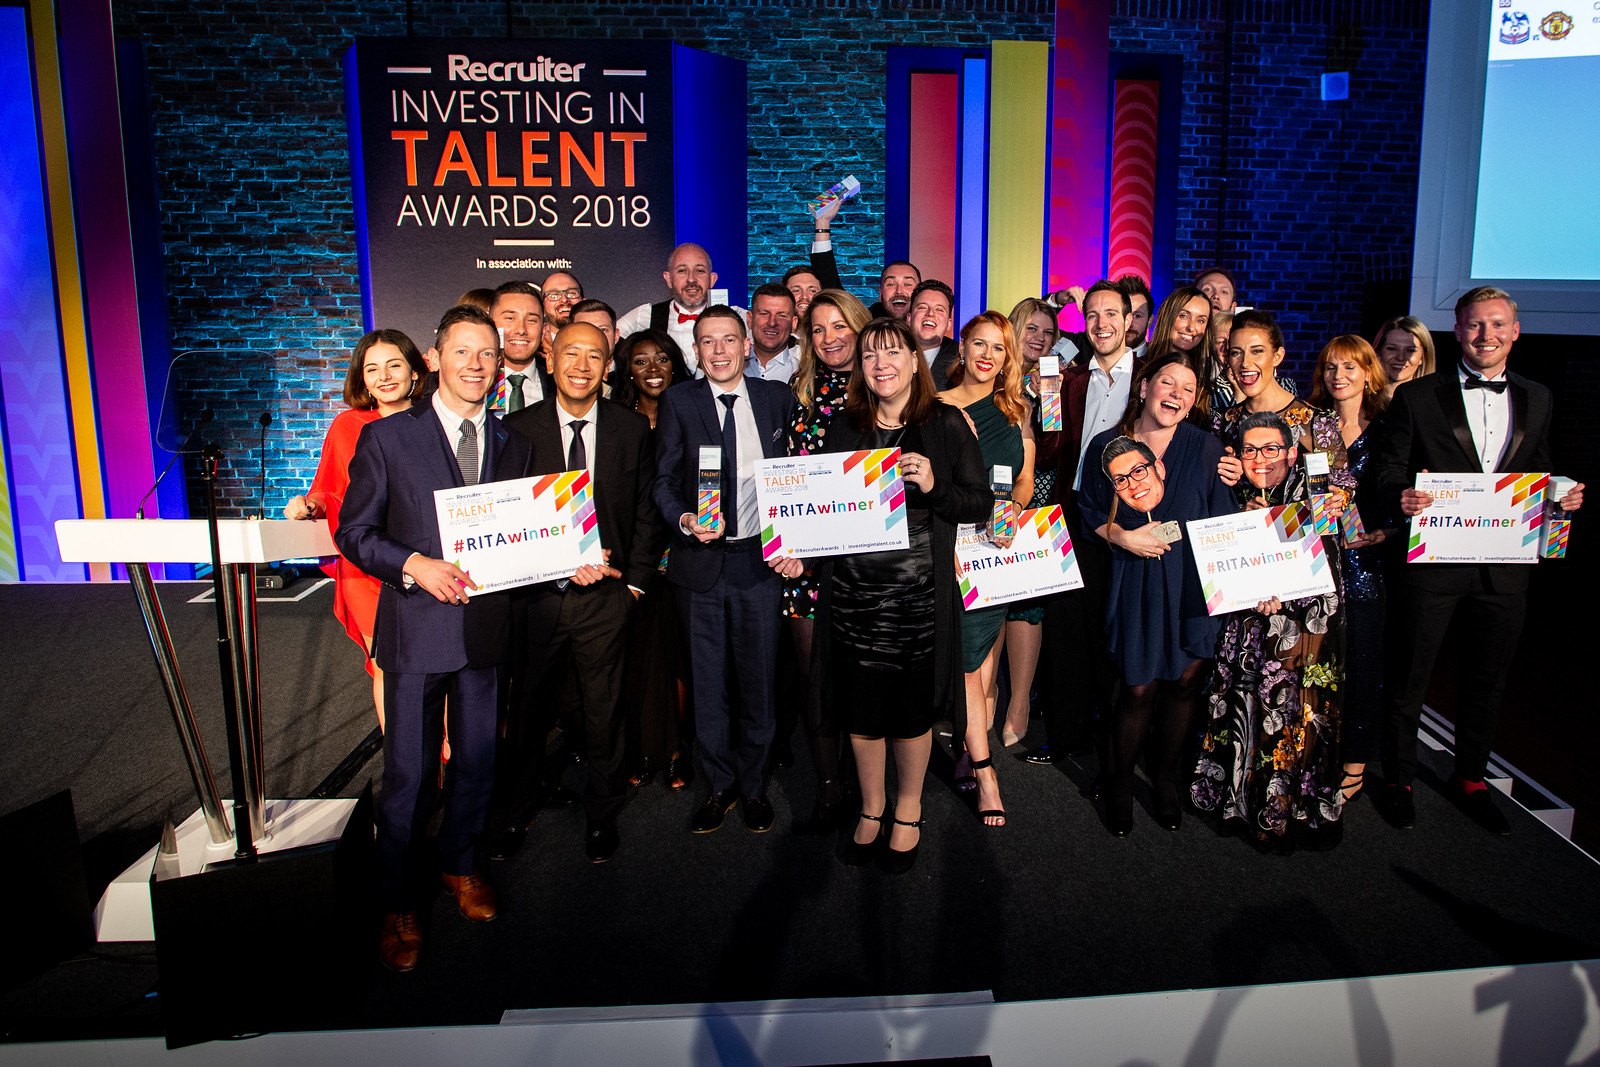 Recruiter's Investing in Talent Awards 2018